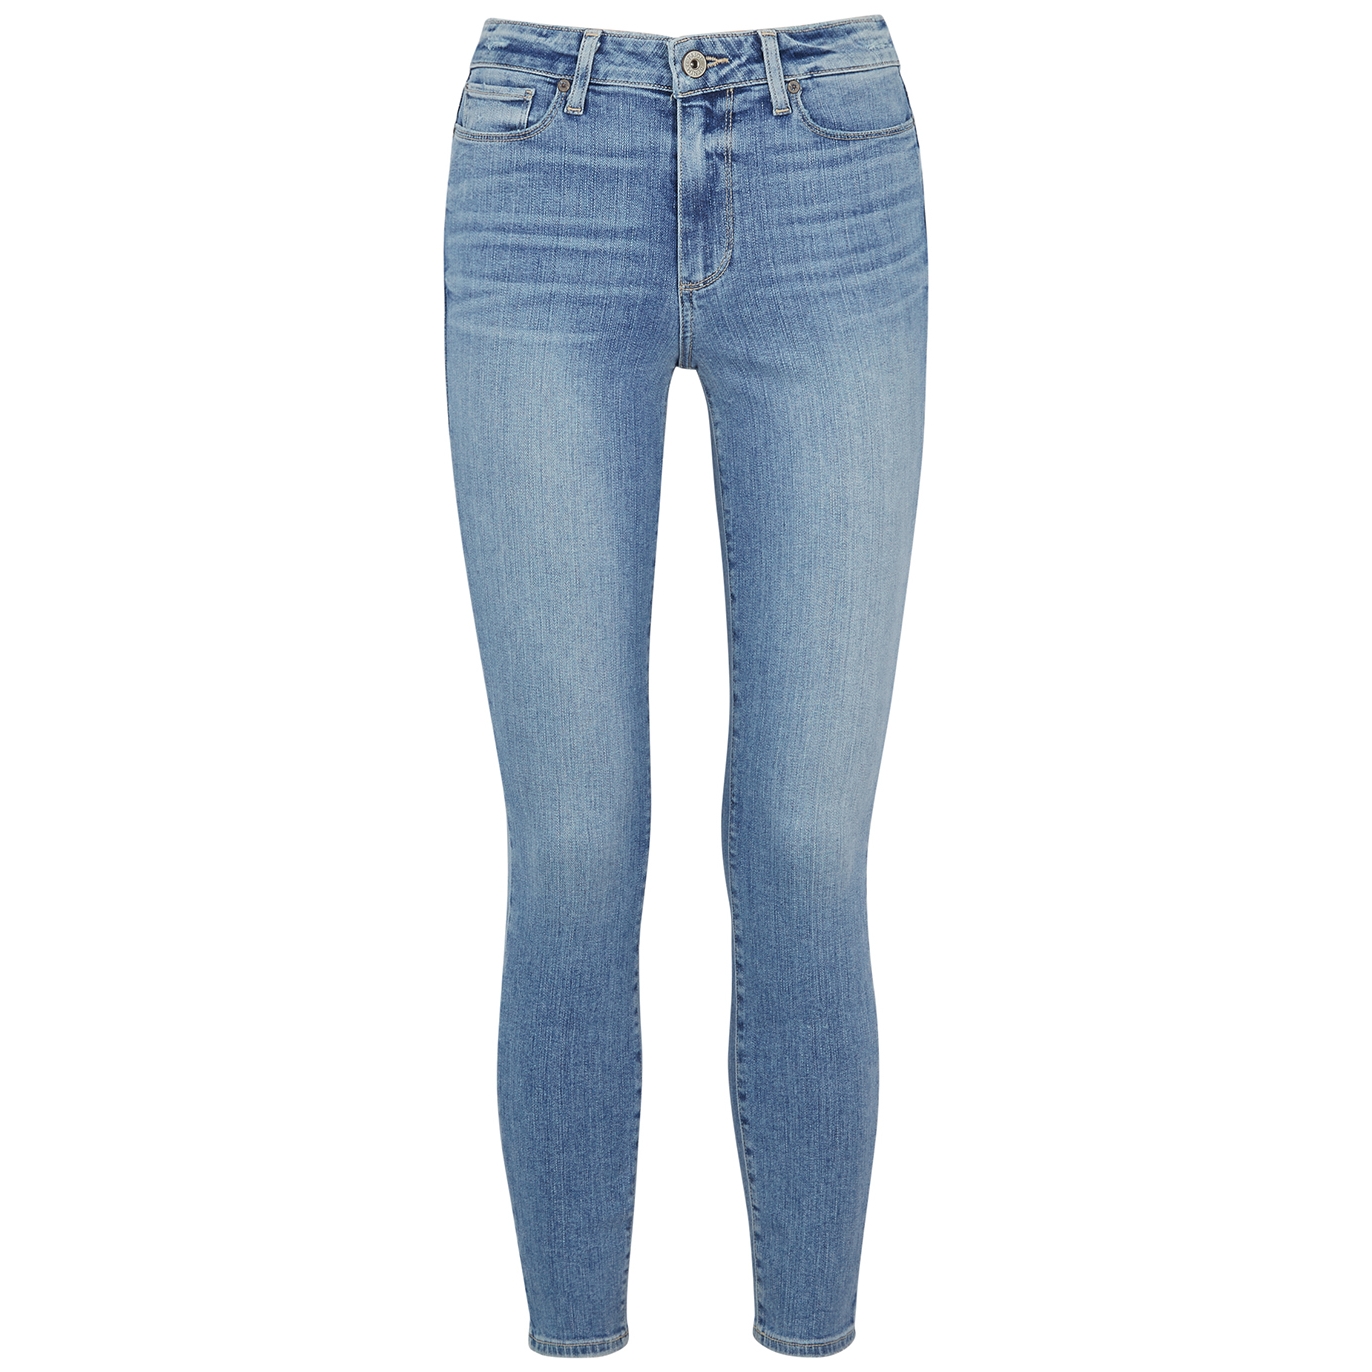 Paige Hoxton Ankle Light Blue Skinny Jeans